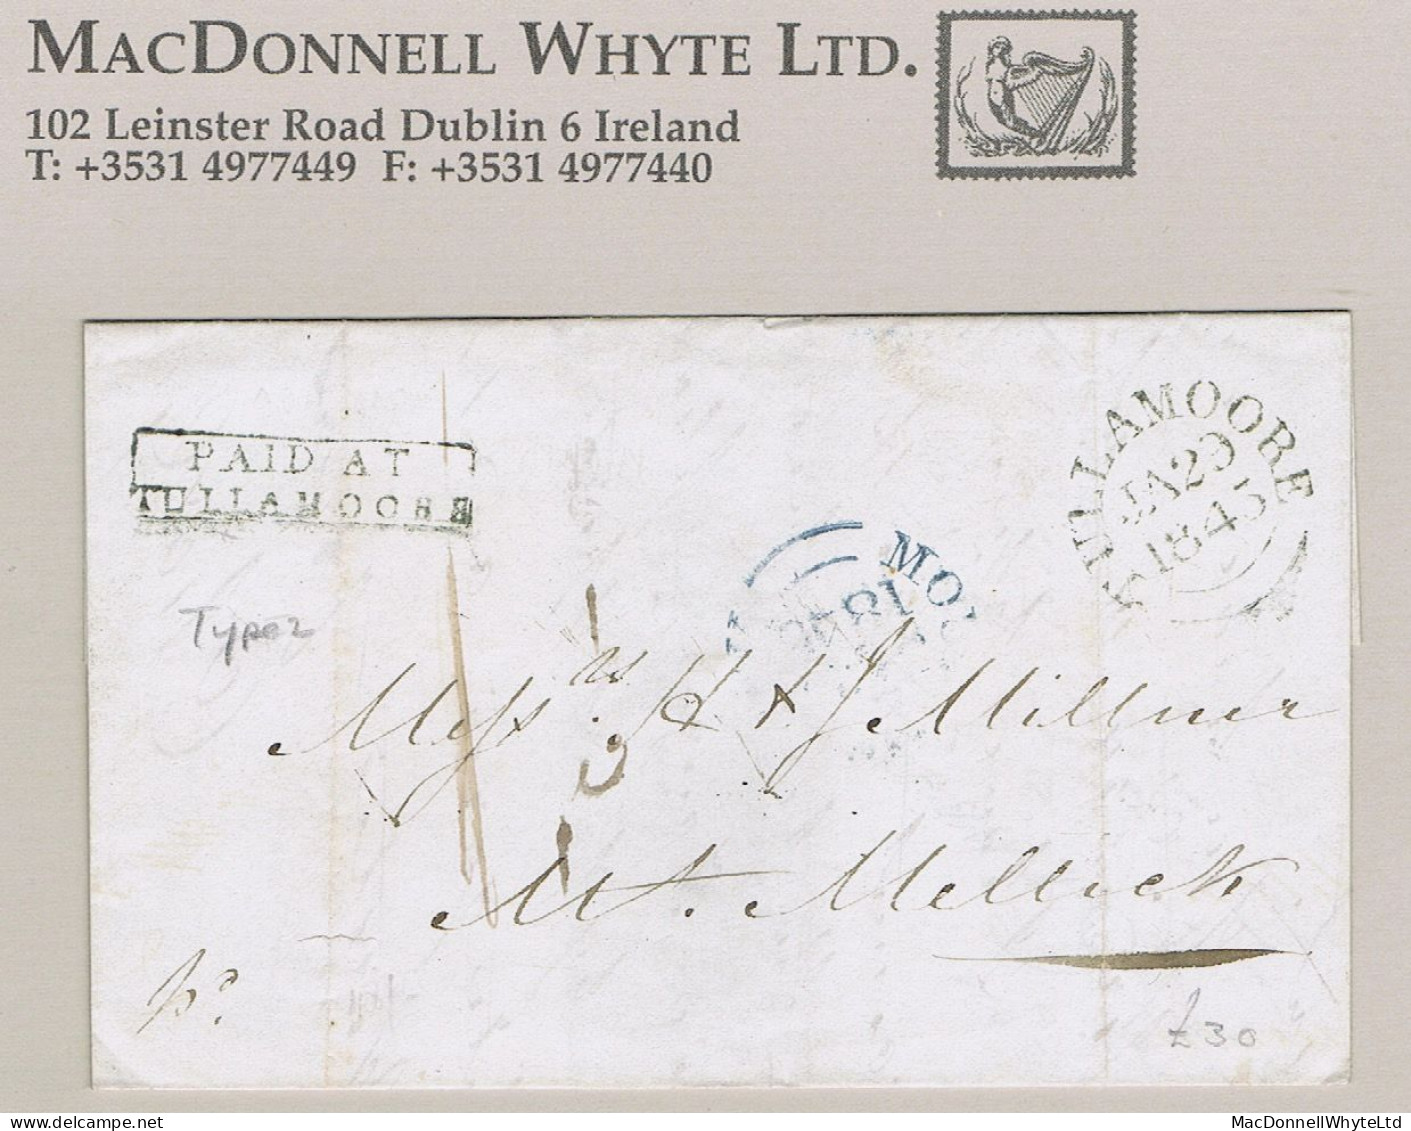 Ireland Offaly Uniform Penny Post 1845 Cover To Mountmellick With Boxed PAID AT/TULLAMOORE, TULLAMOORE JA 29 1845 - Préphilatélie